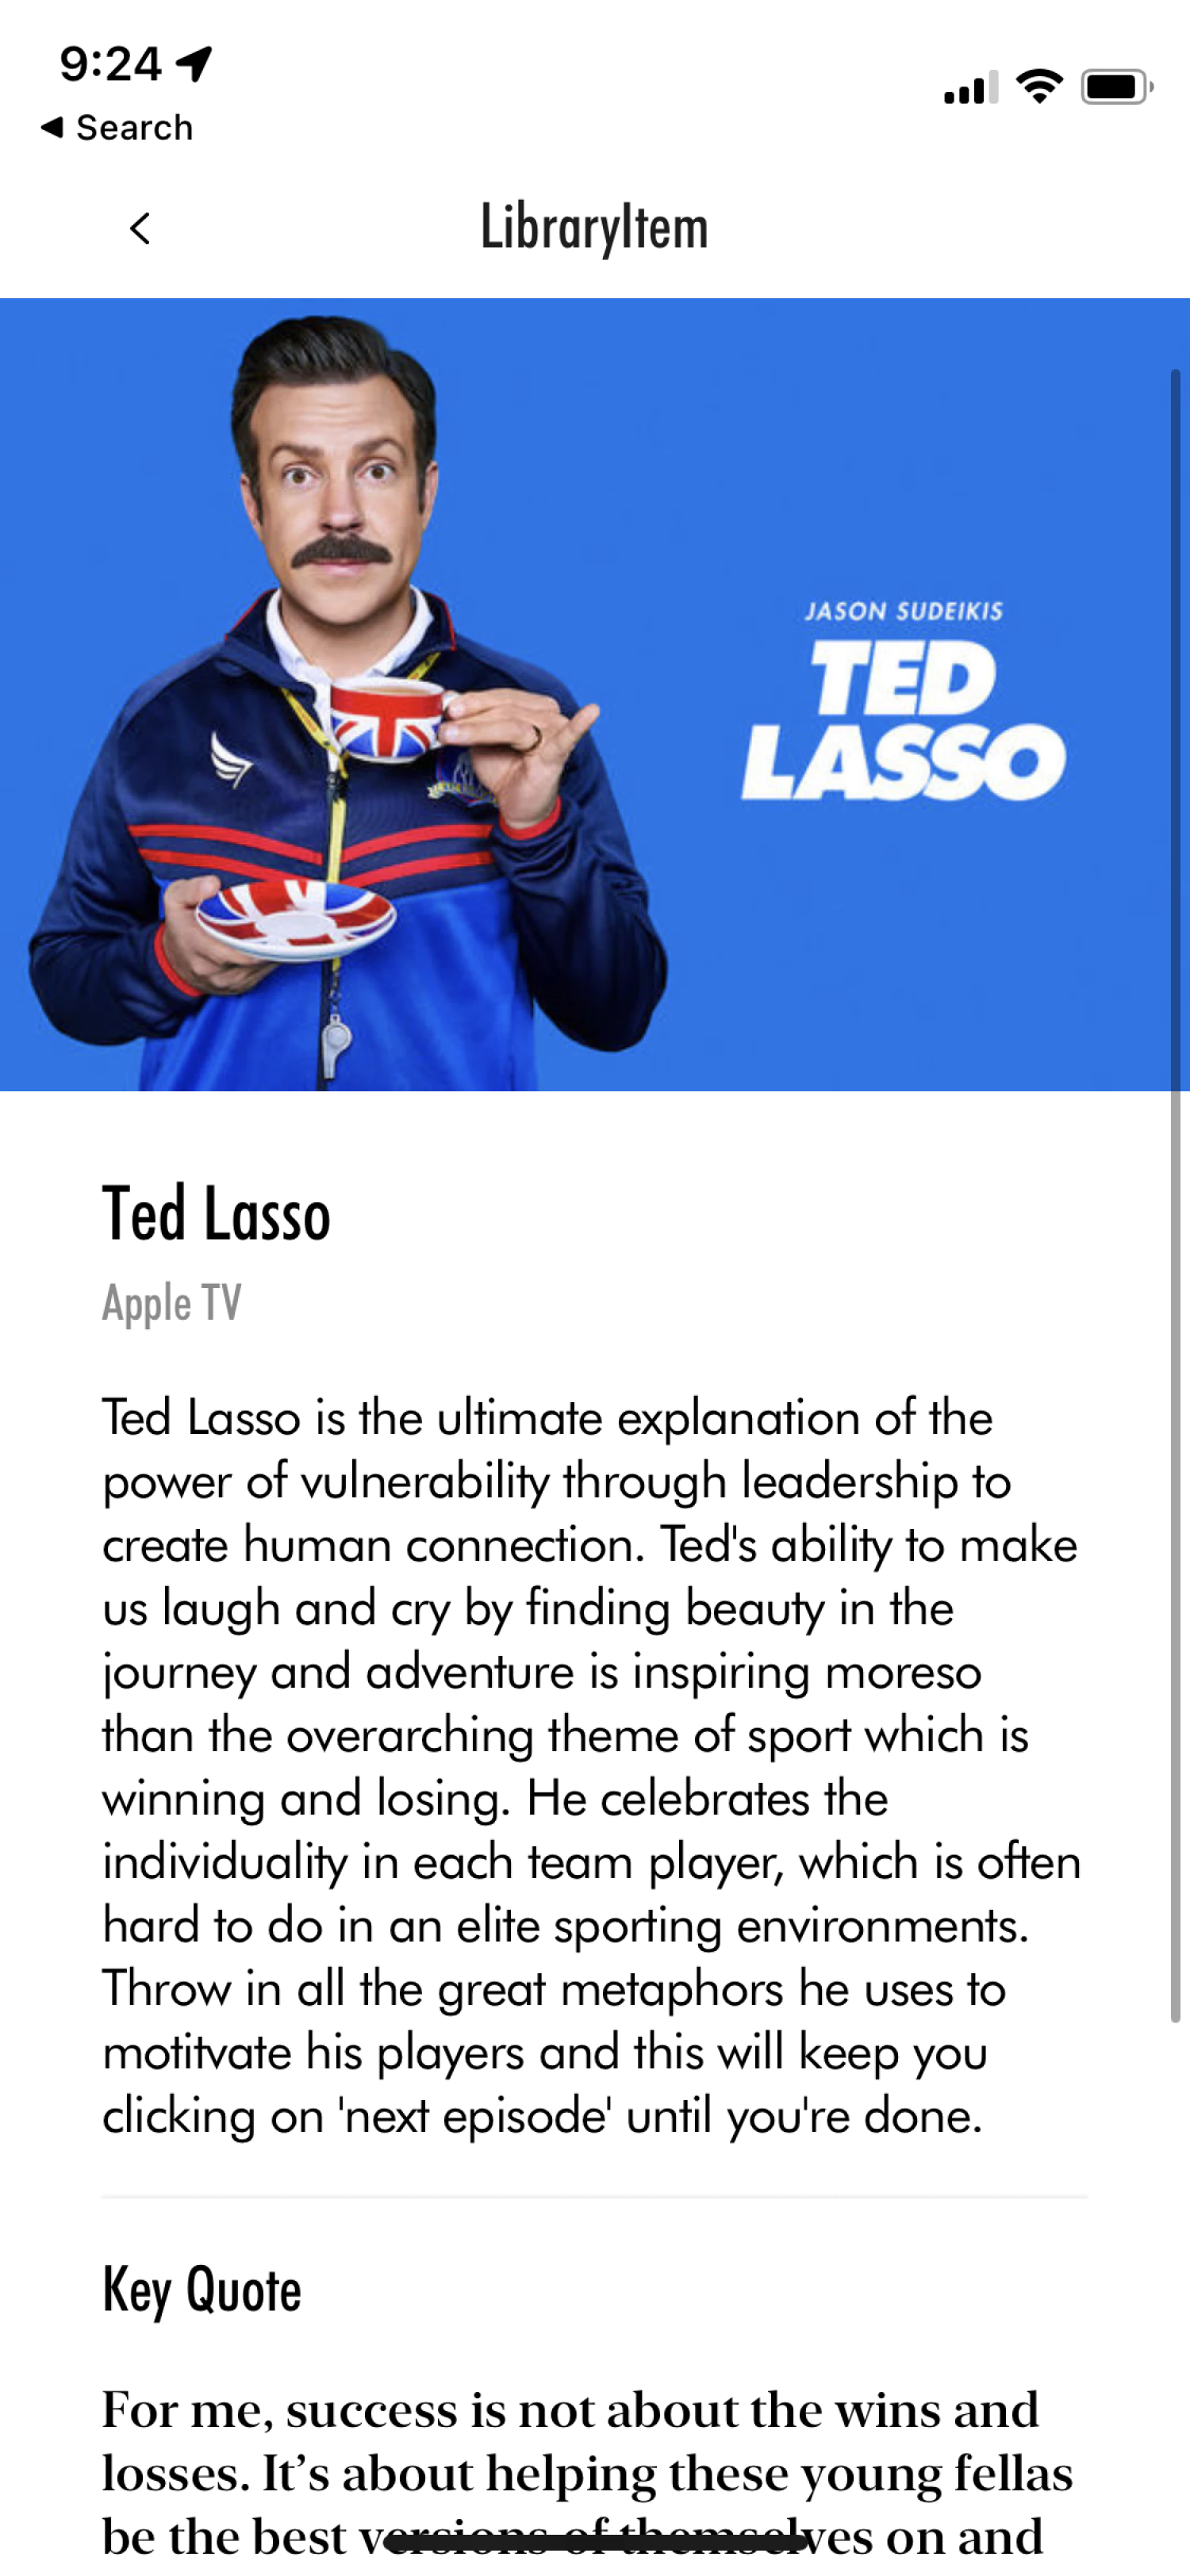 Ted Lasso is a recommendation in the Mojo Crowe app's library.